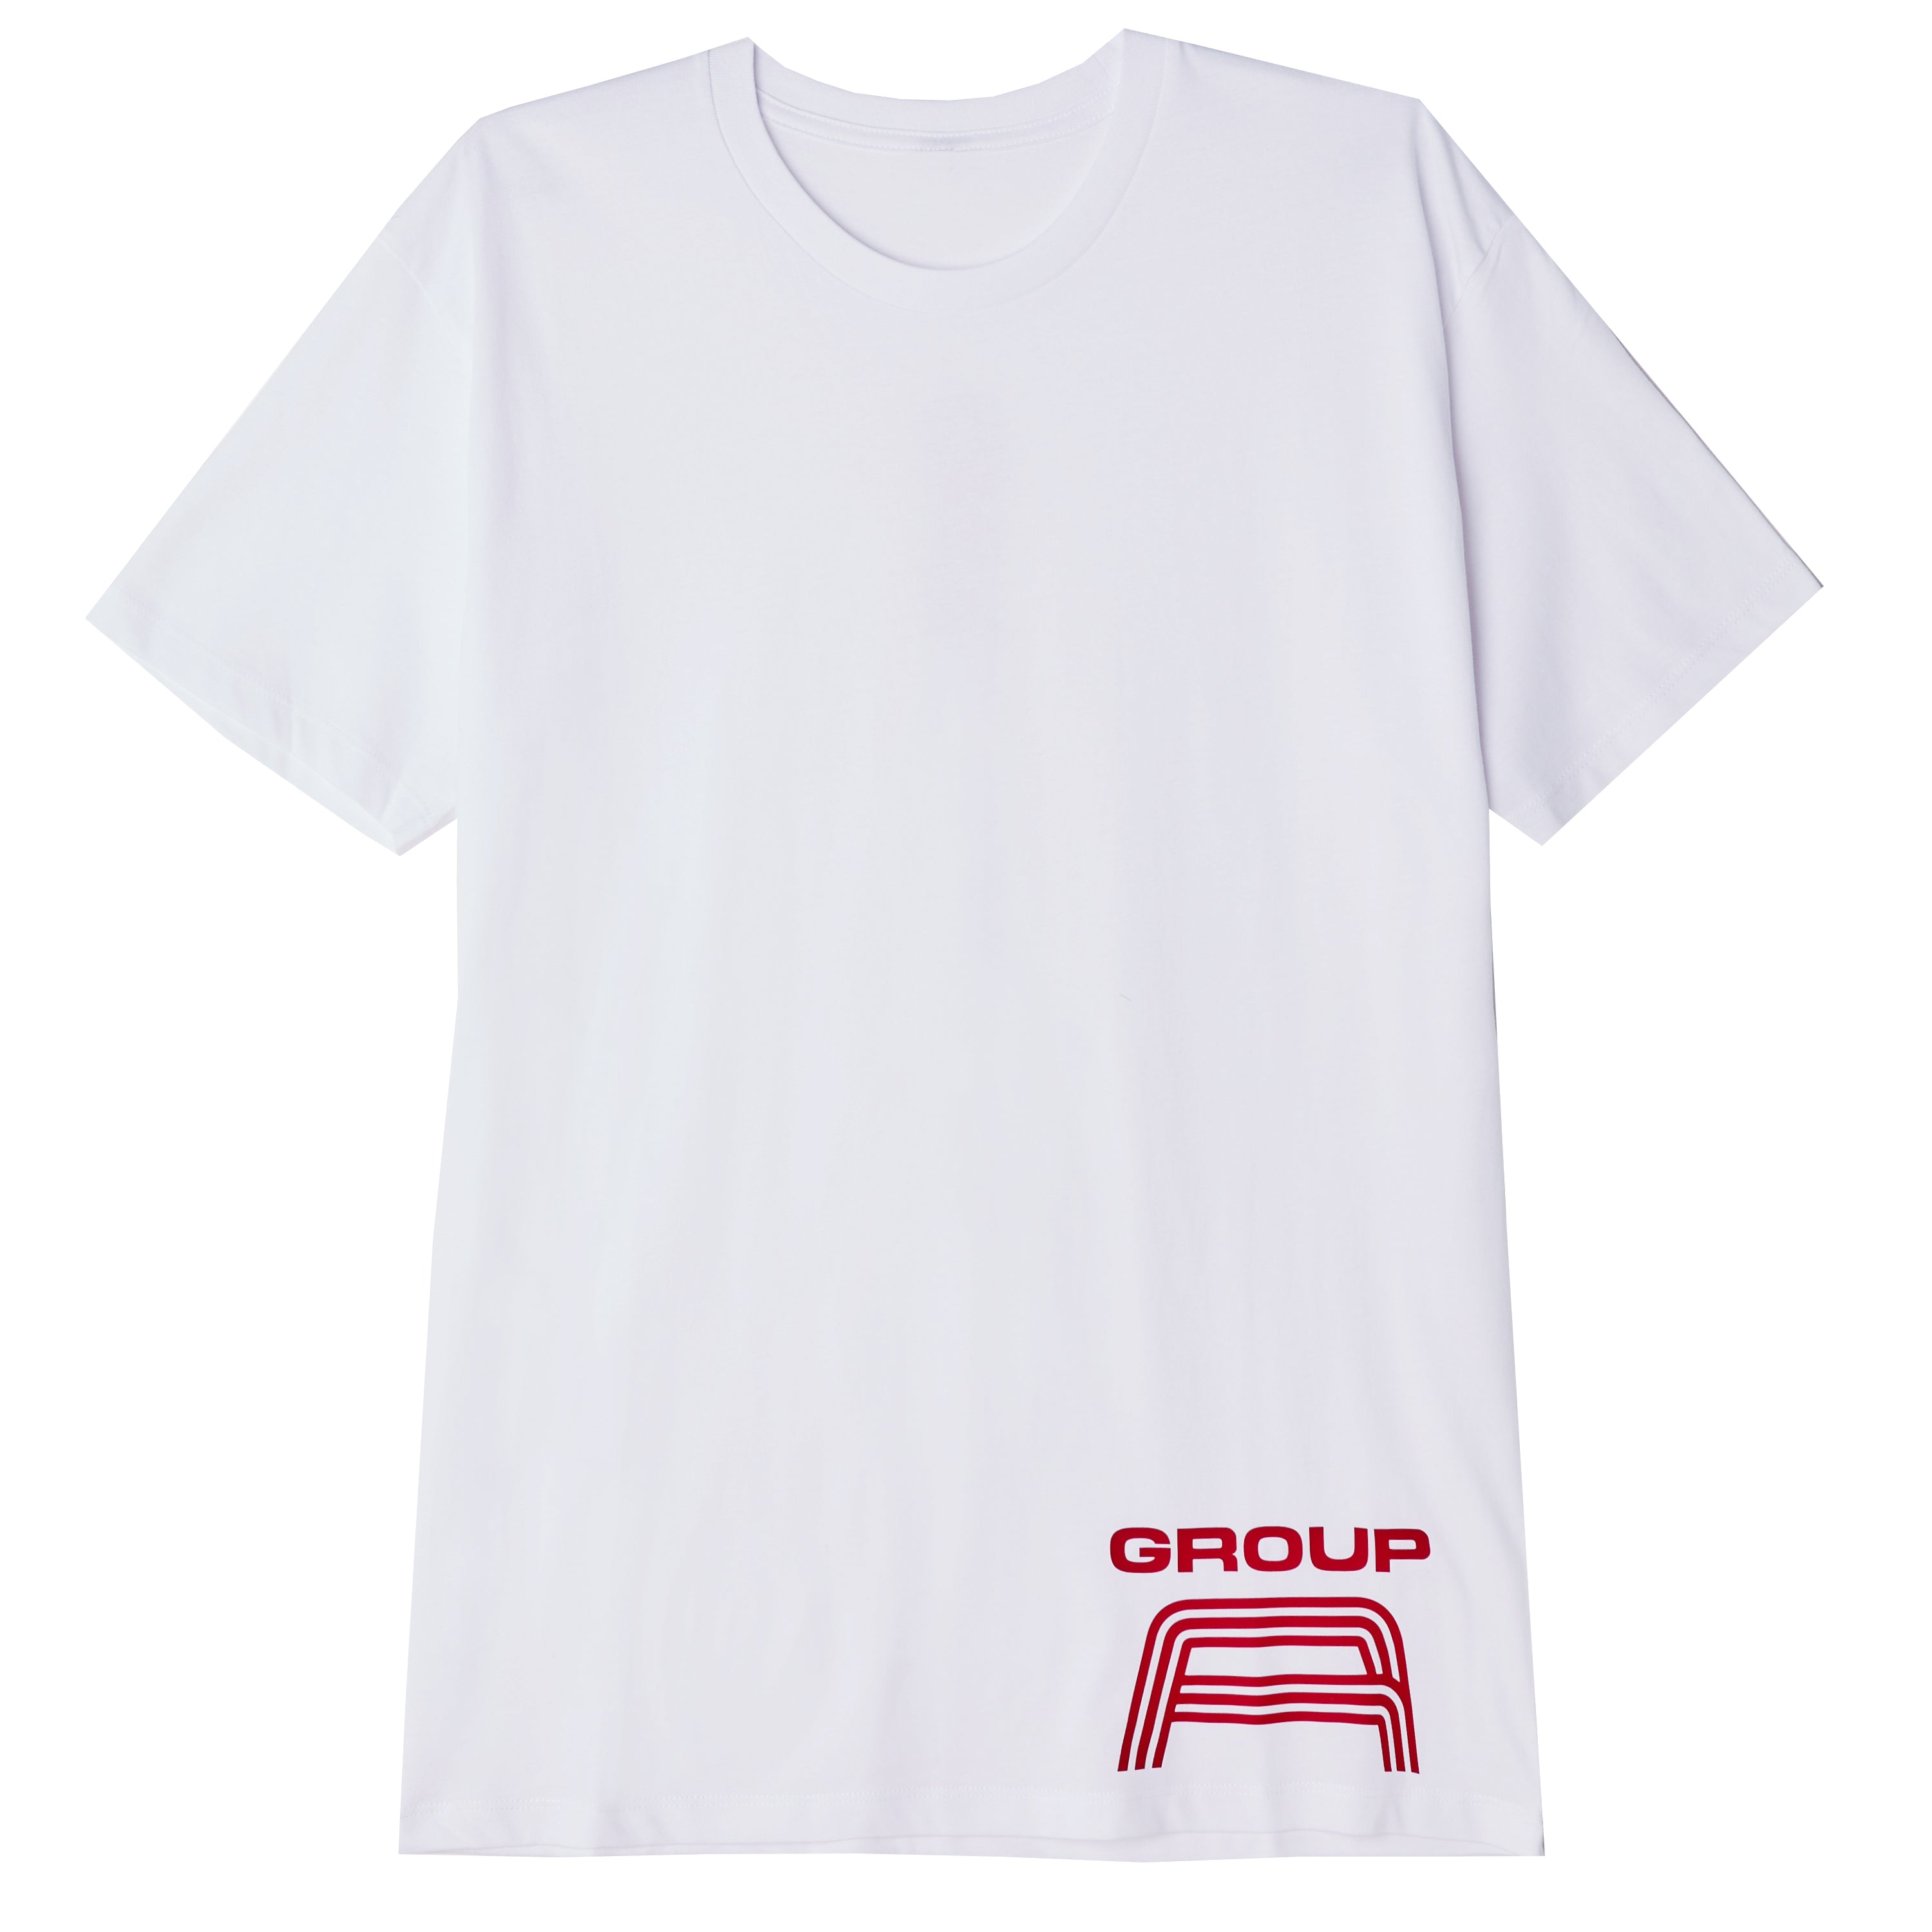 Drop Line - White/Red